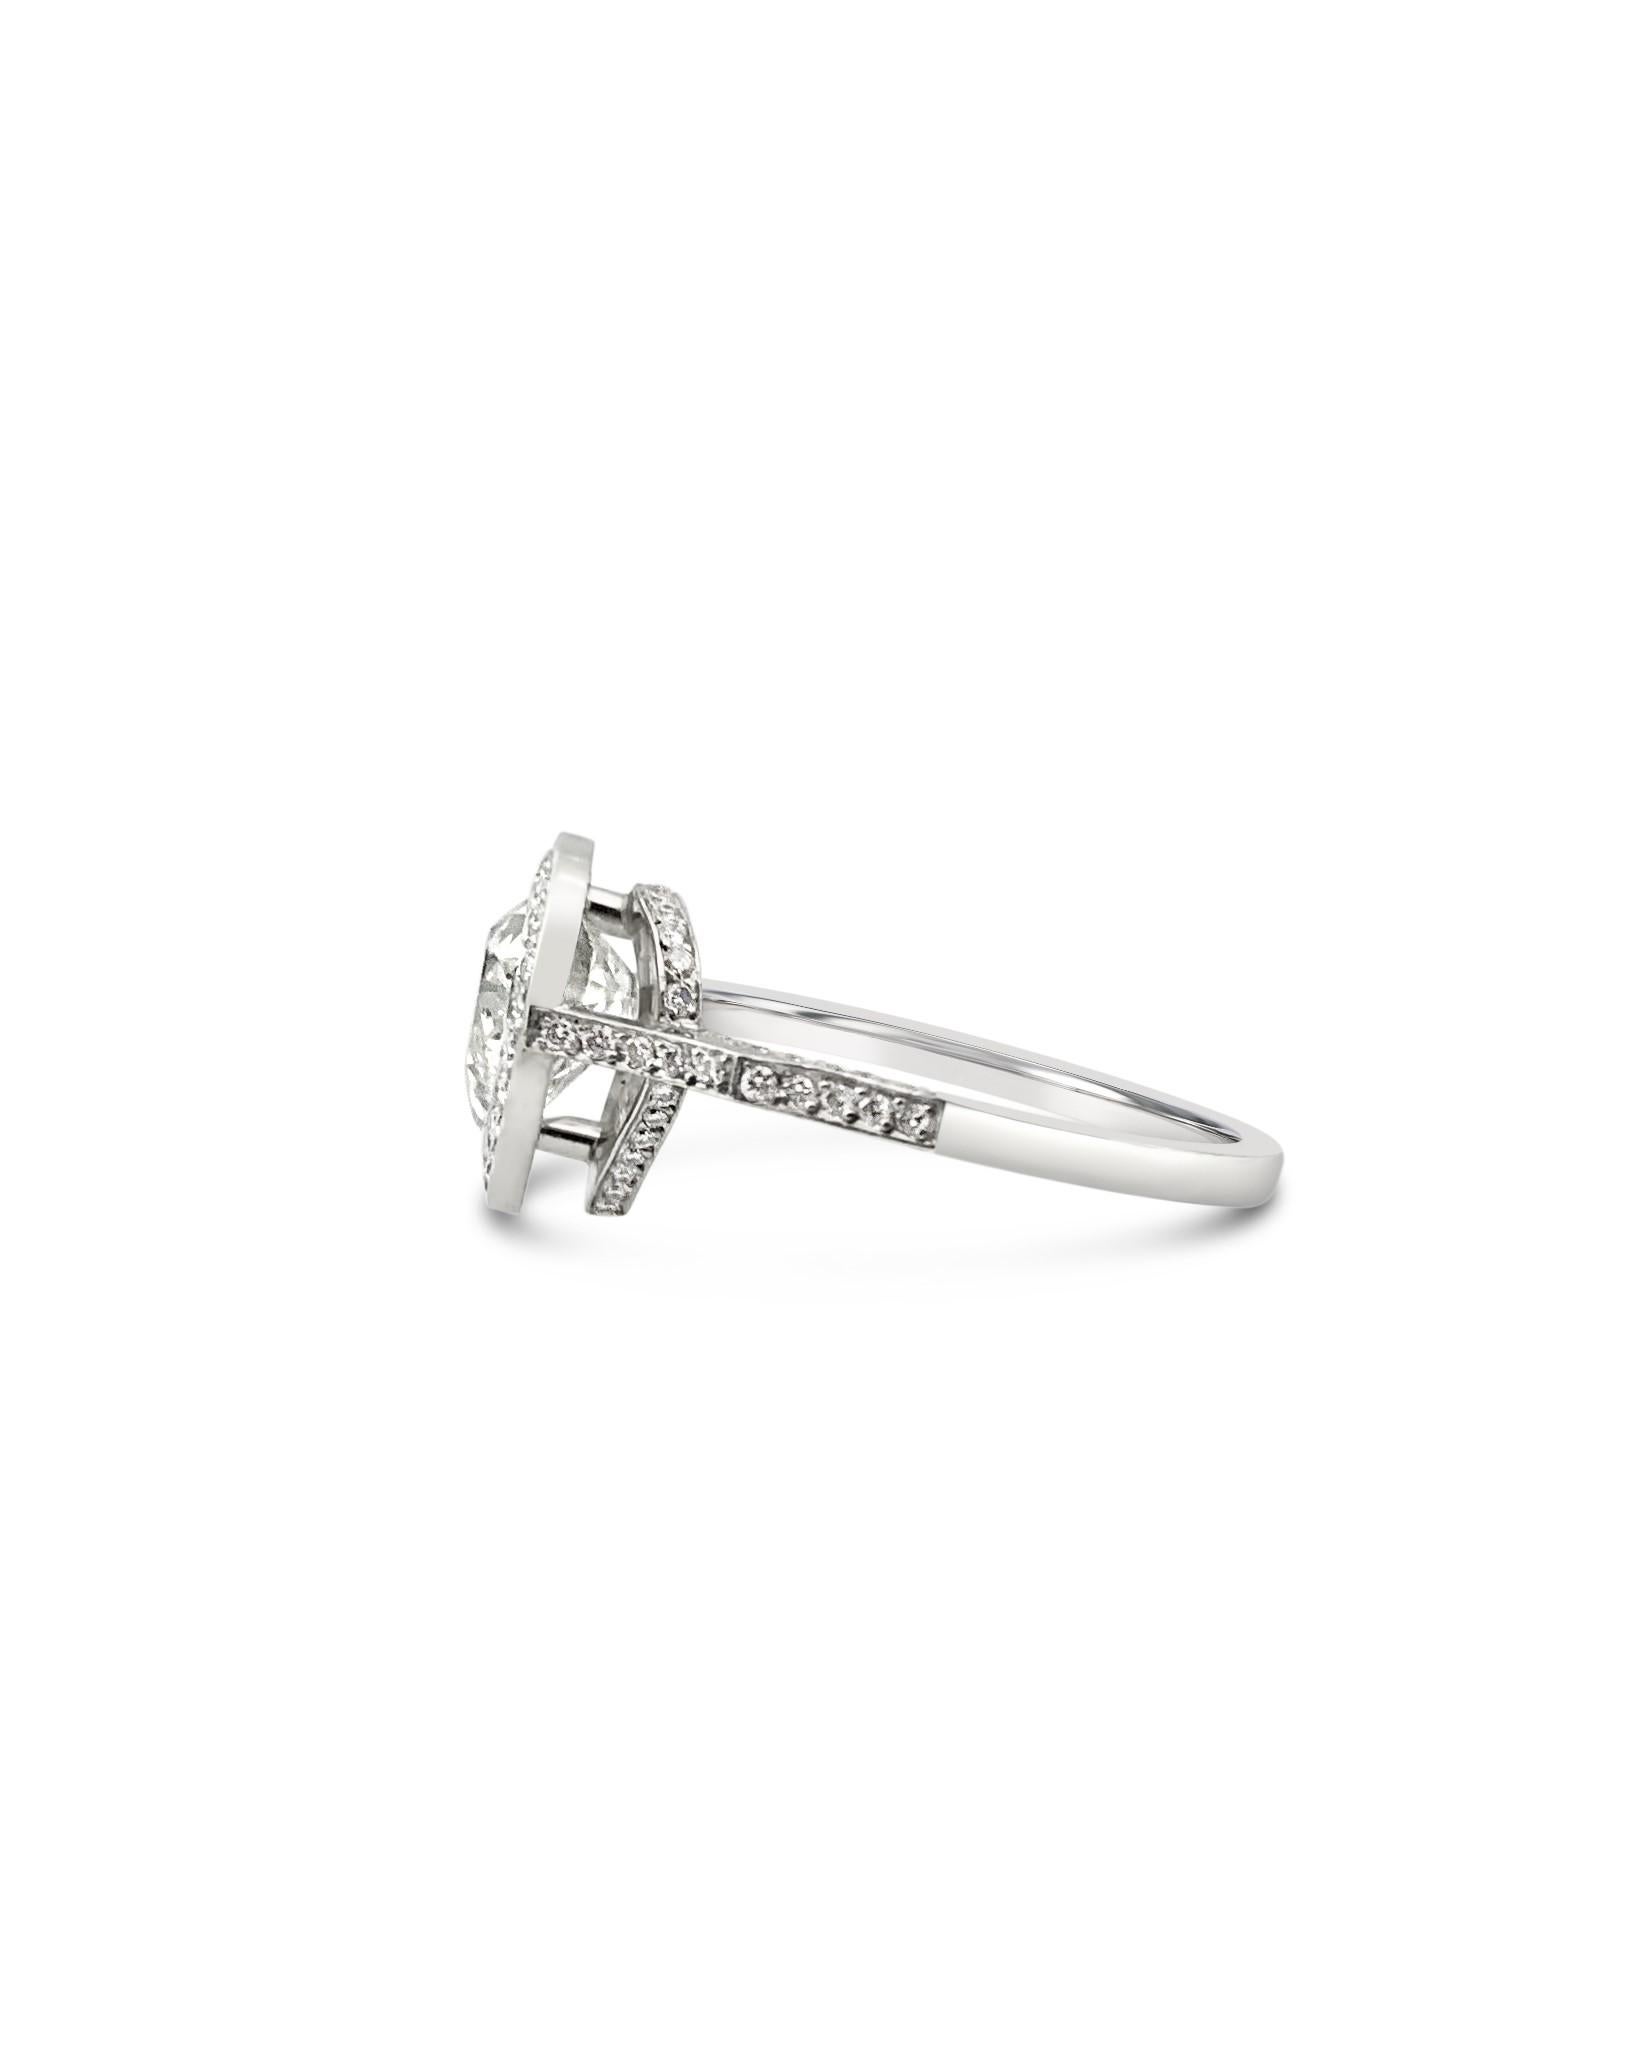 Elevate your love story with our 1.63 Carat GIA Certified F SI1 Heart Shaped Diamond Ring, a symbol of eternal devotion. This stunning ring features:

- A brilliant heart-shaped diamond weighing 1.63 carats, the embodiment of your love and